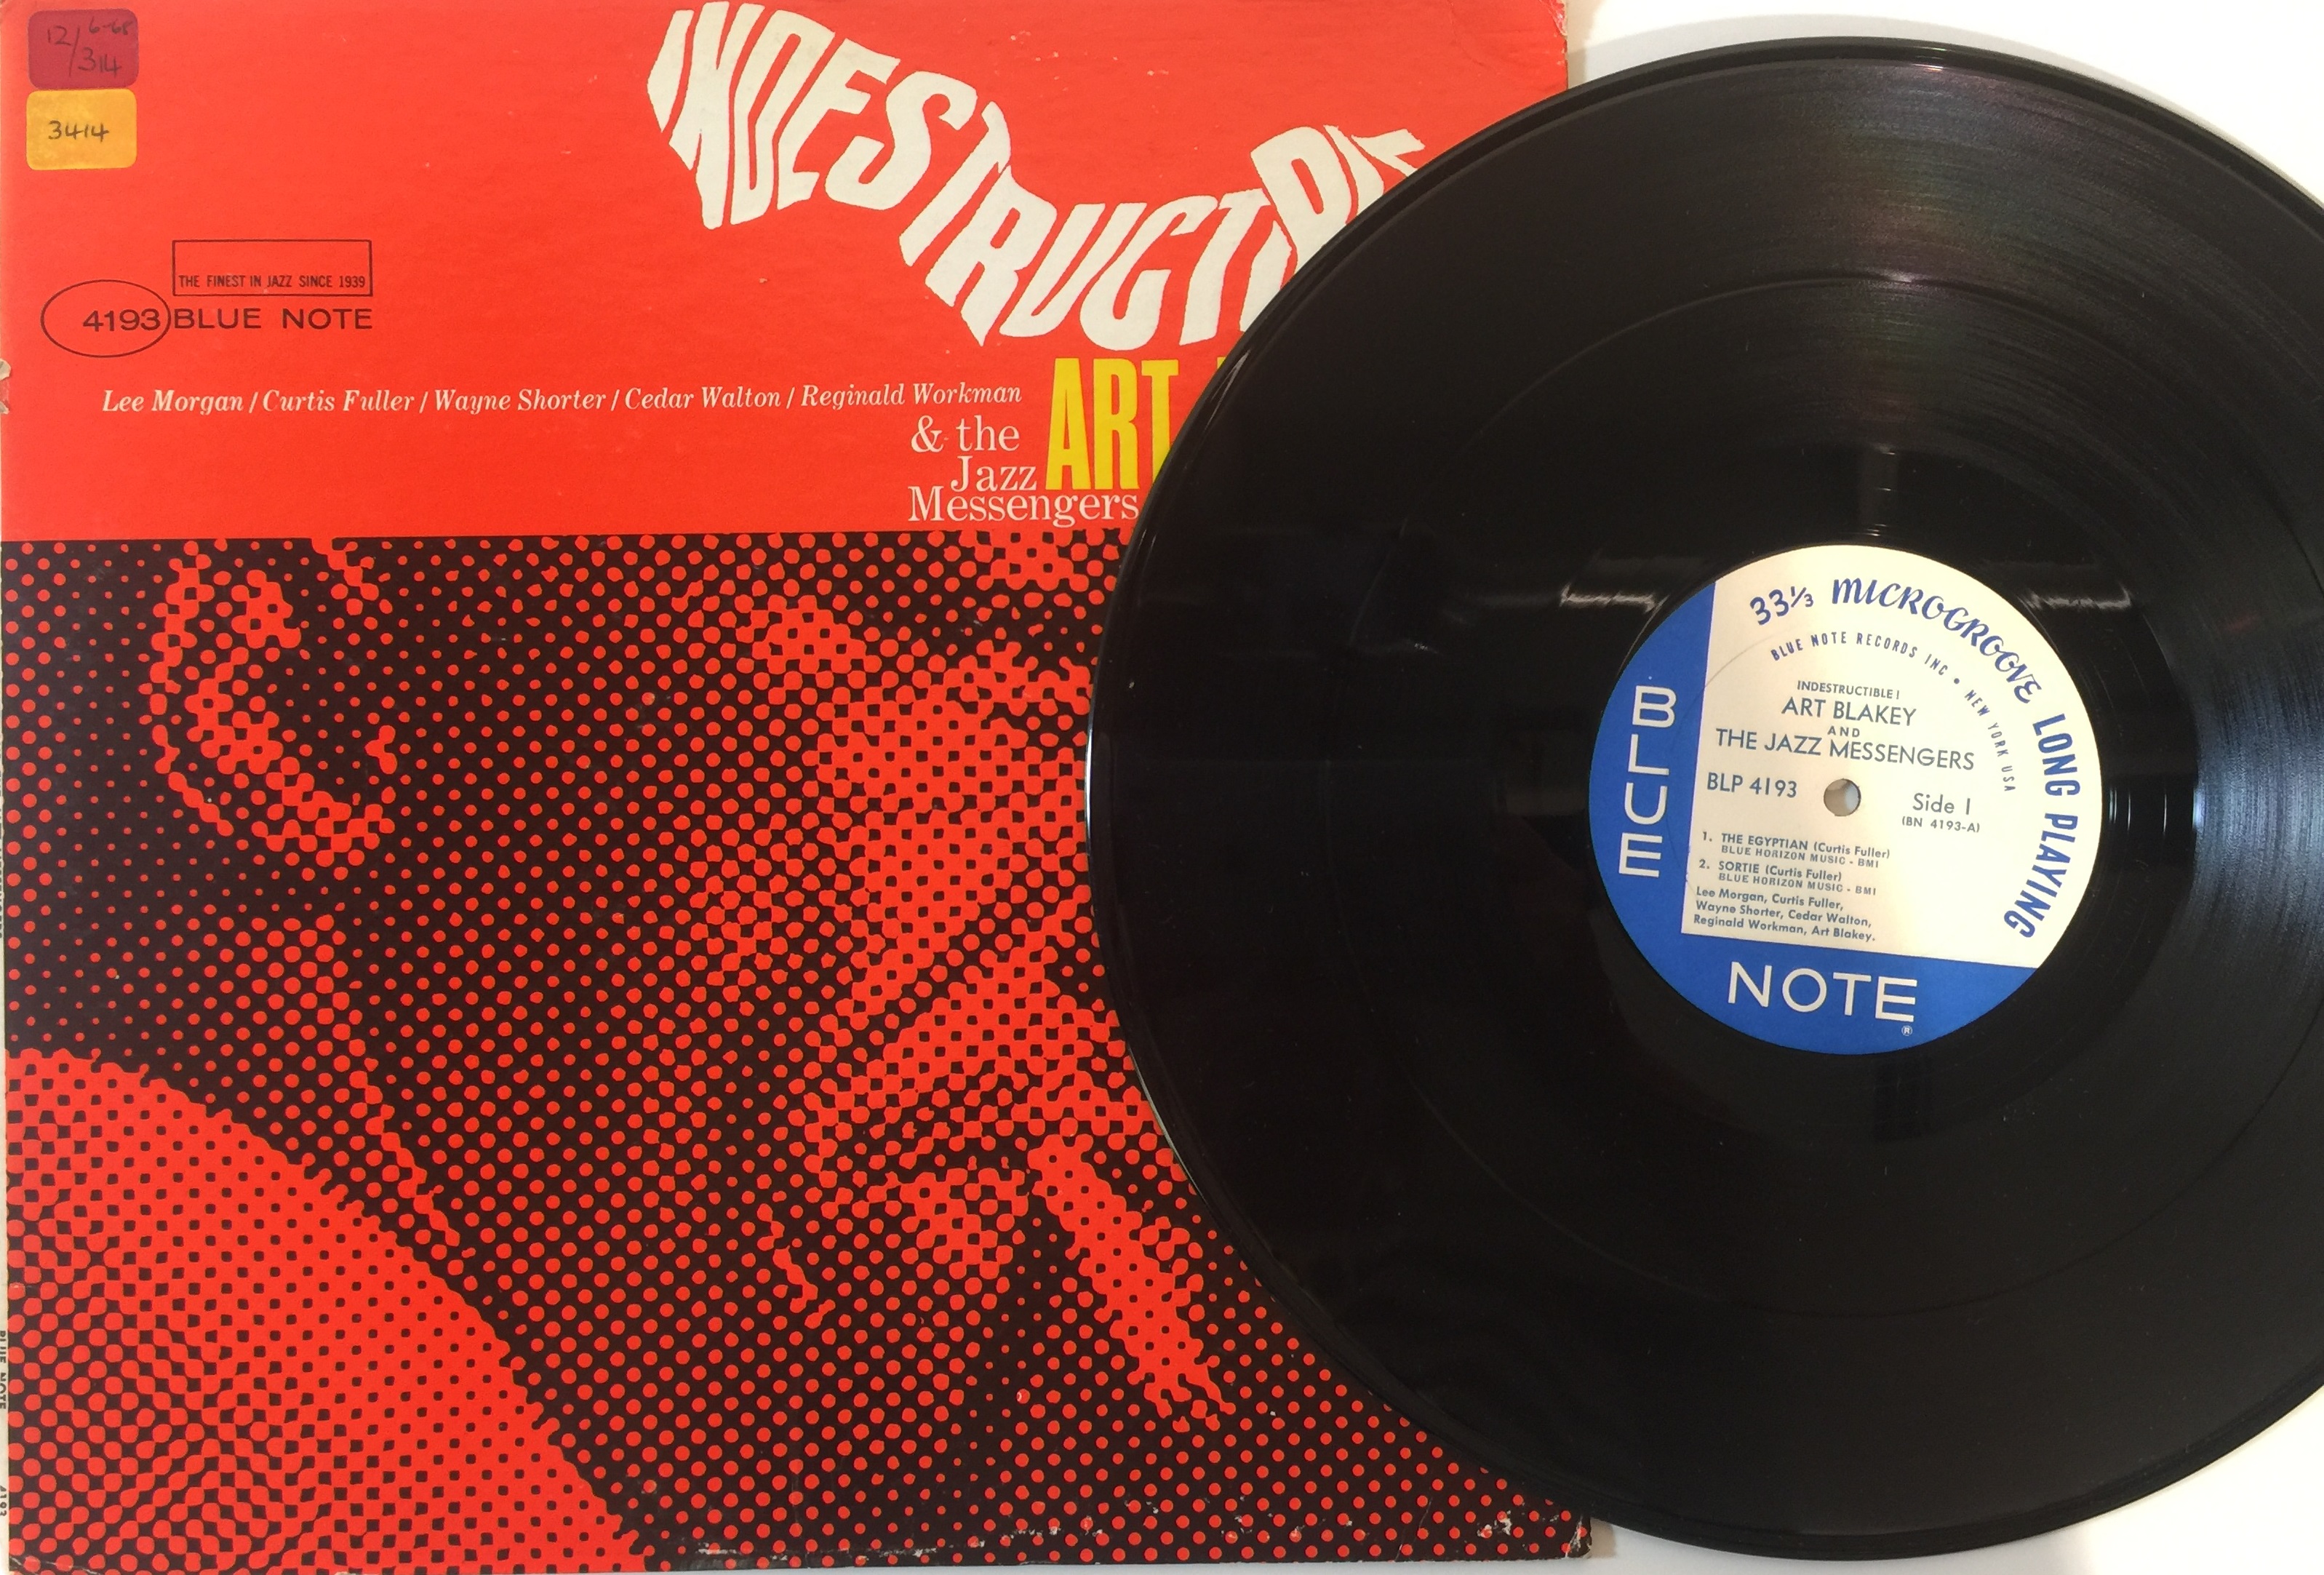 BLUE NOTE - LPs ('47 WEST 63RD' & 'NEW YORK USA' LABELS). Cool pack of 3 x early US Blue Note LPs. - Image 3 of 8